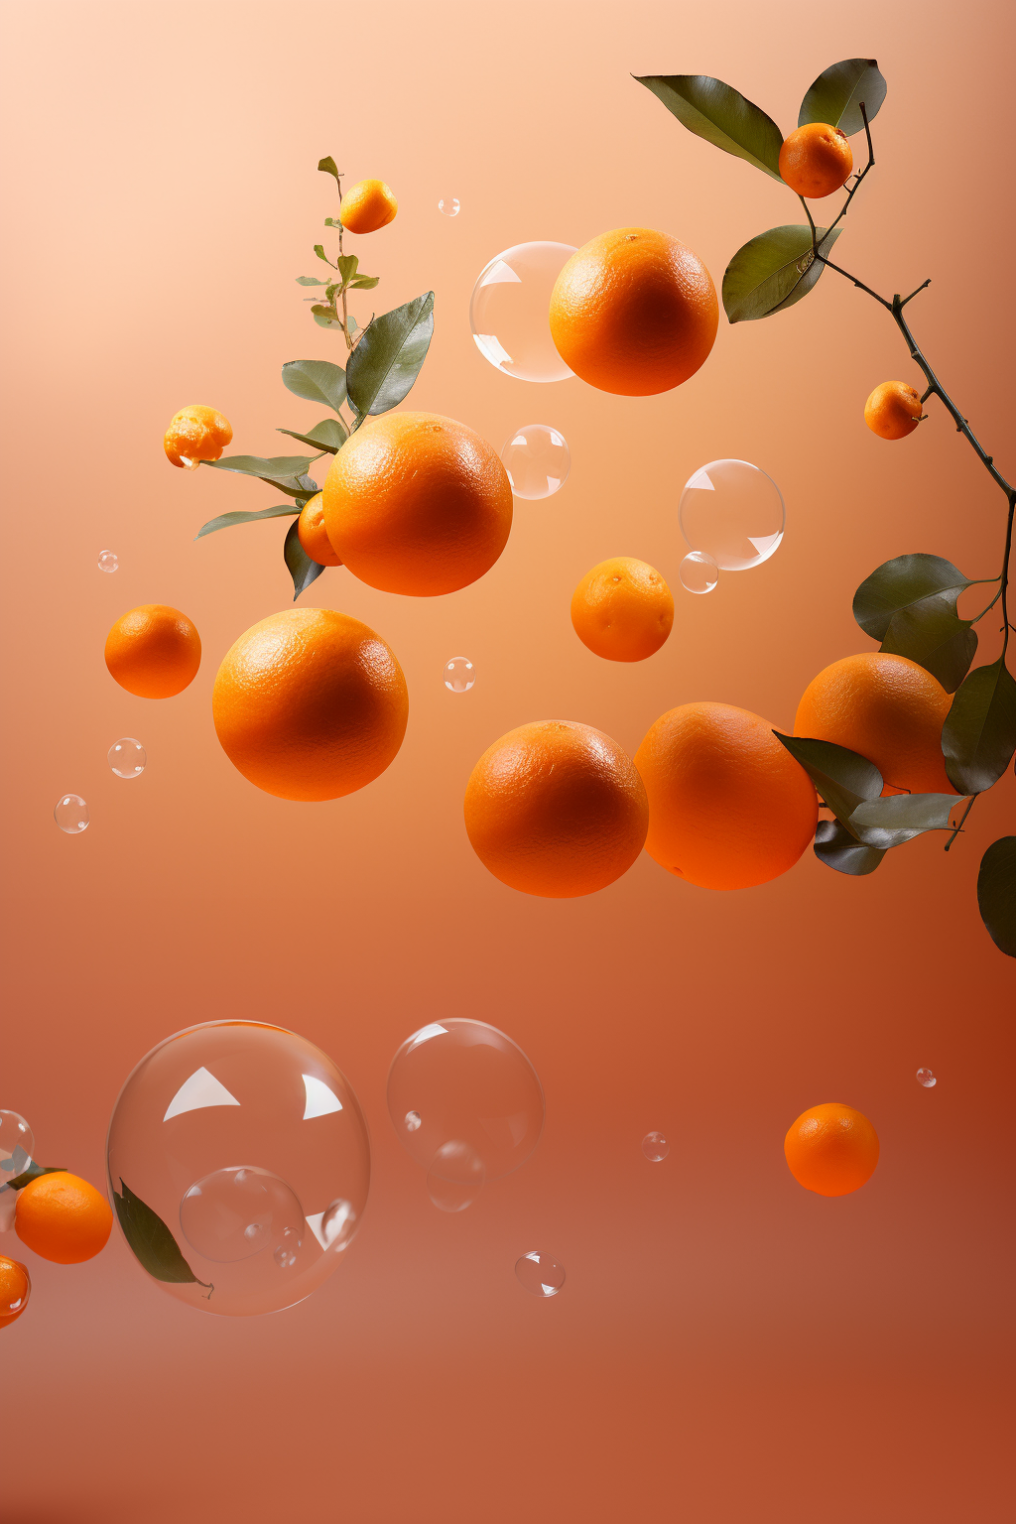 phengrant_orange_backdrop_with_bounching_minimalist_oranges_and_bcc30827-6a61-4c28-ac0e-88c7f8d66903.png